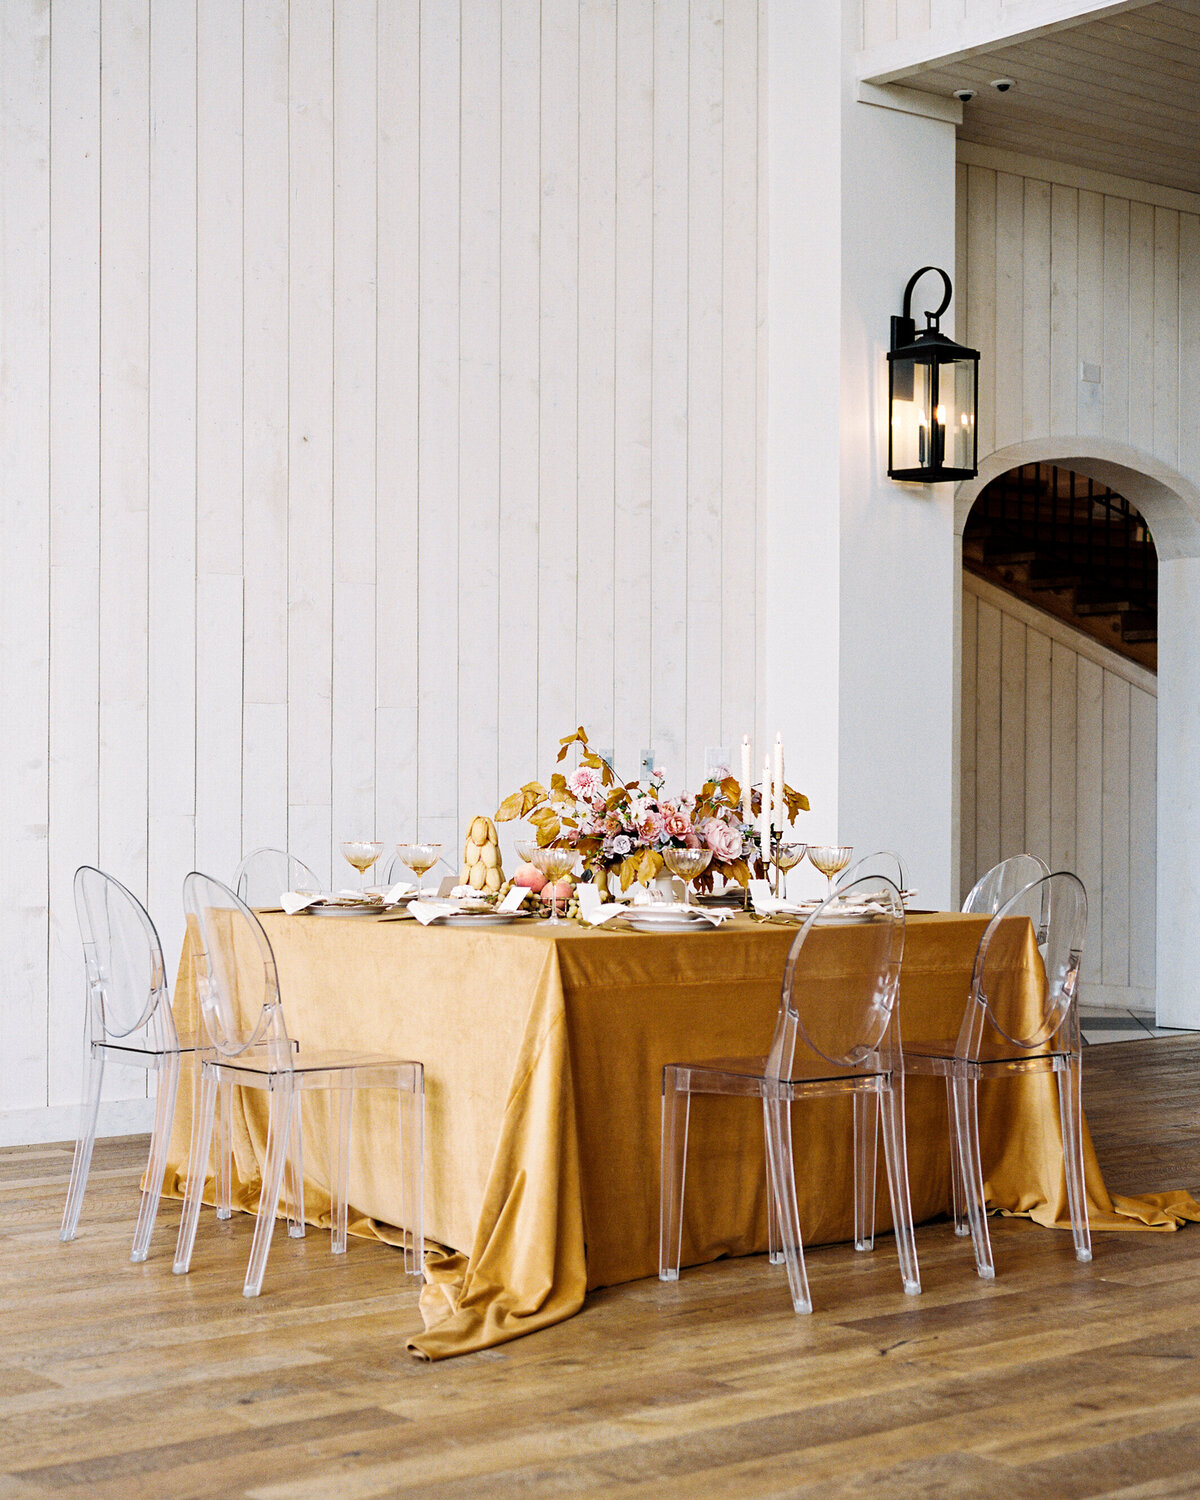 Pulled back image of romantic table setting featuring golden velvet tablecloth and modern chairs